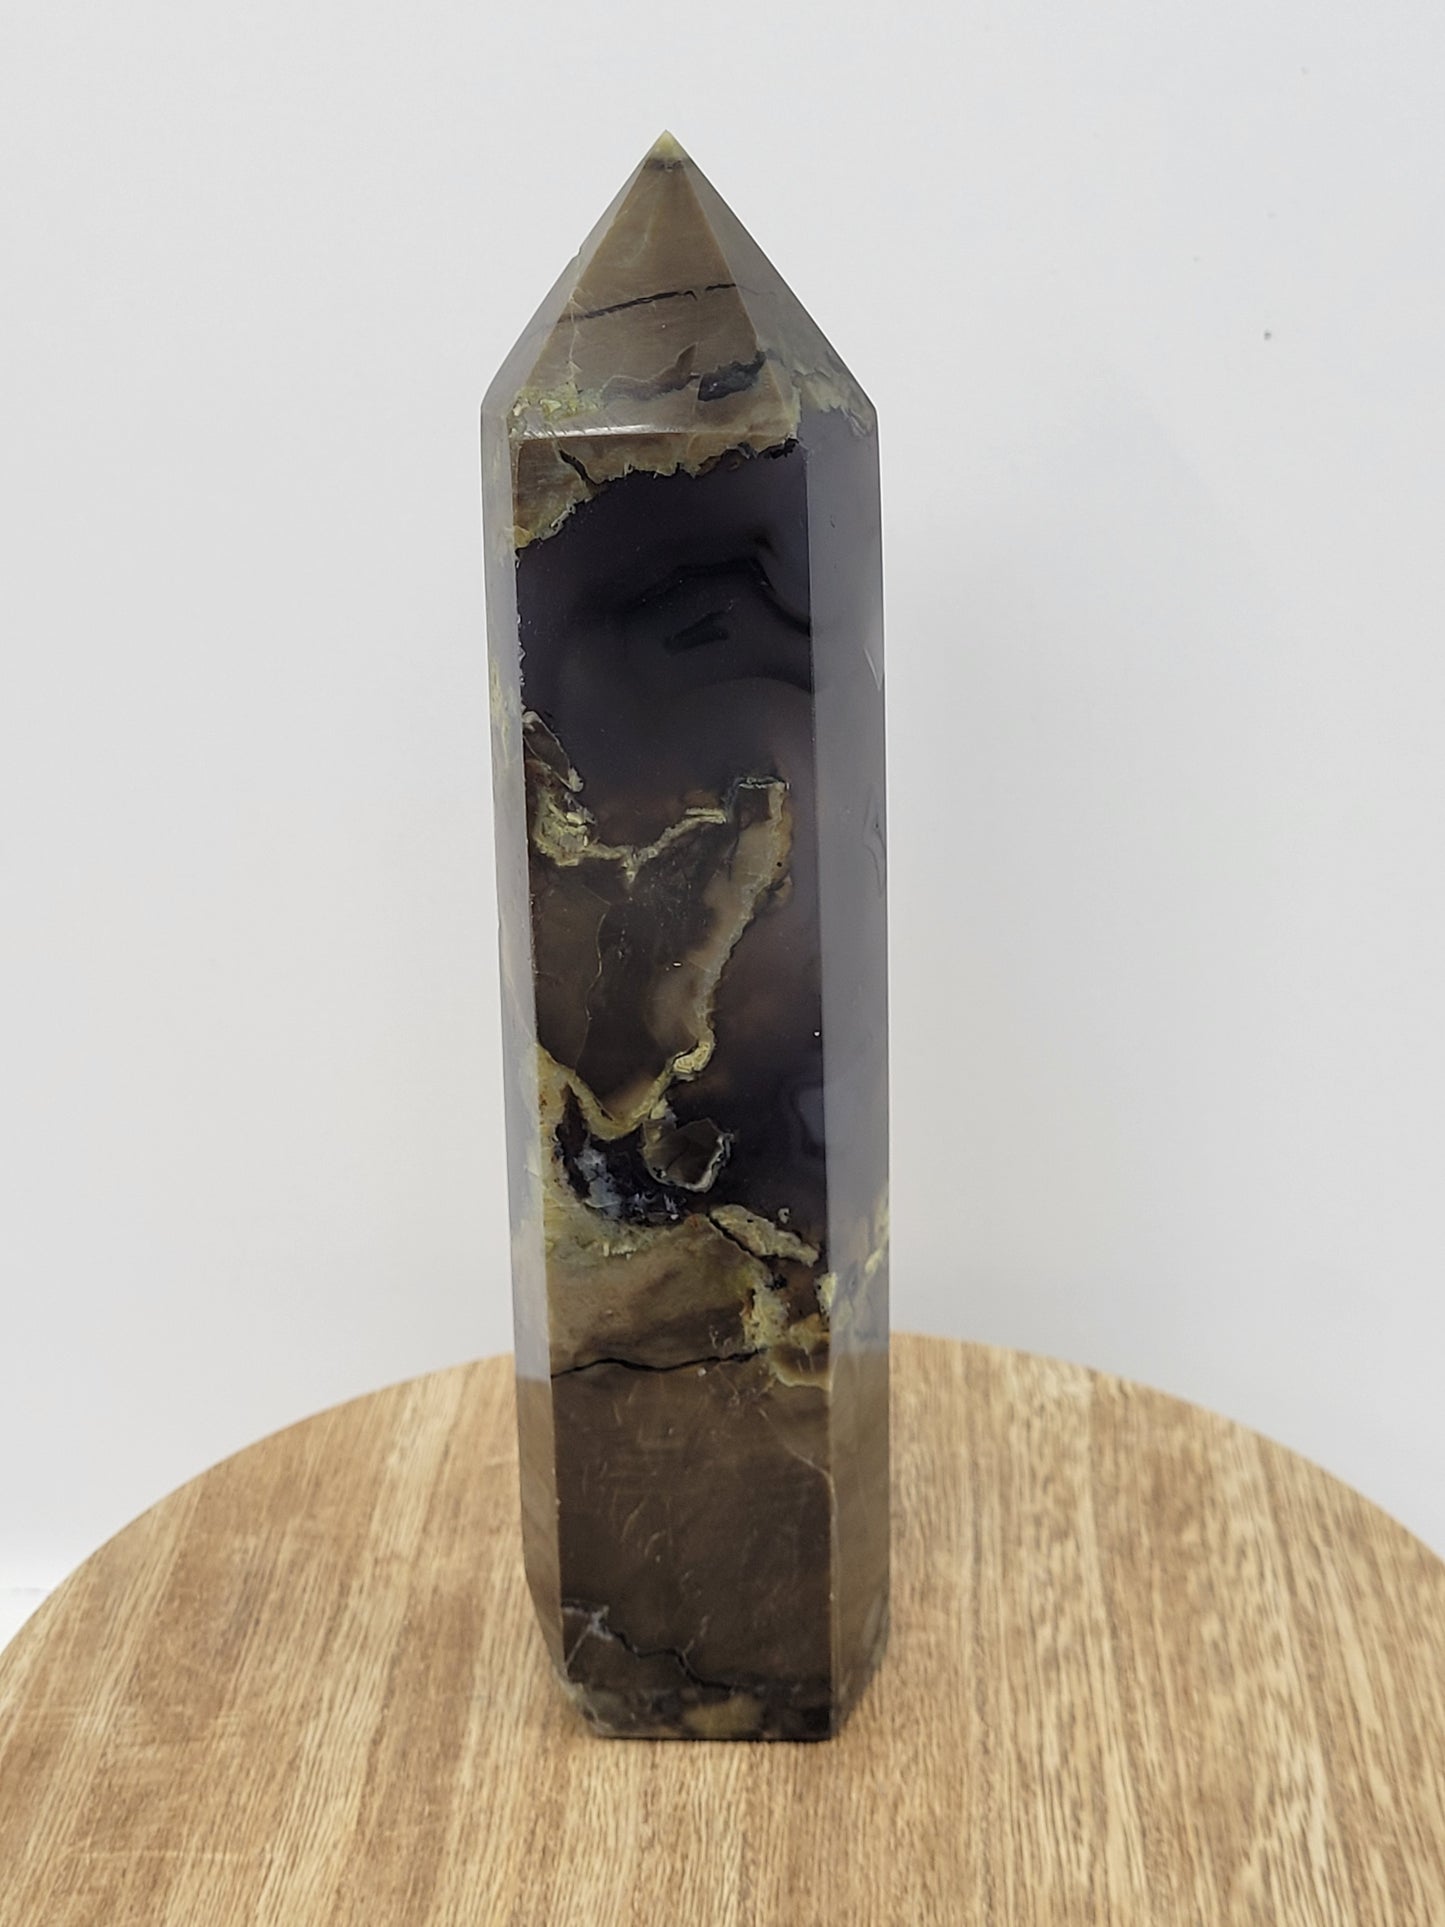 Volcano Agate tower